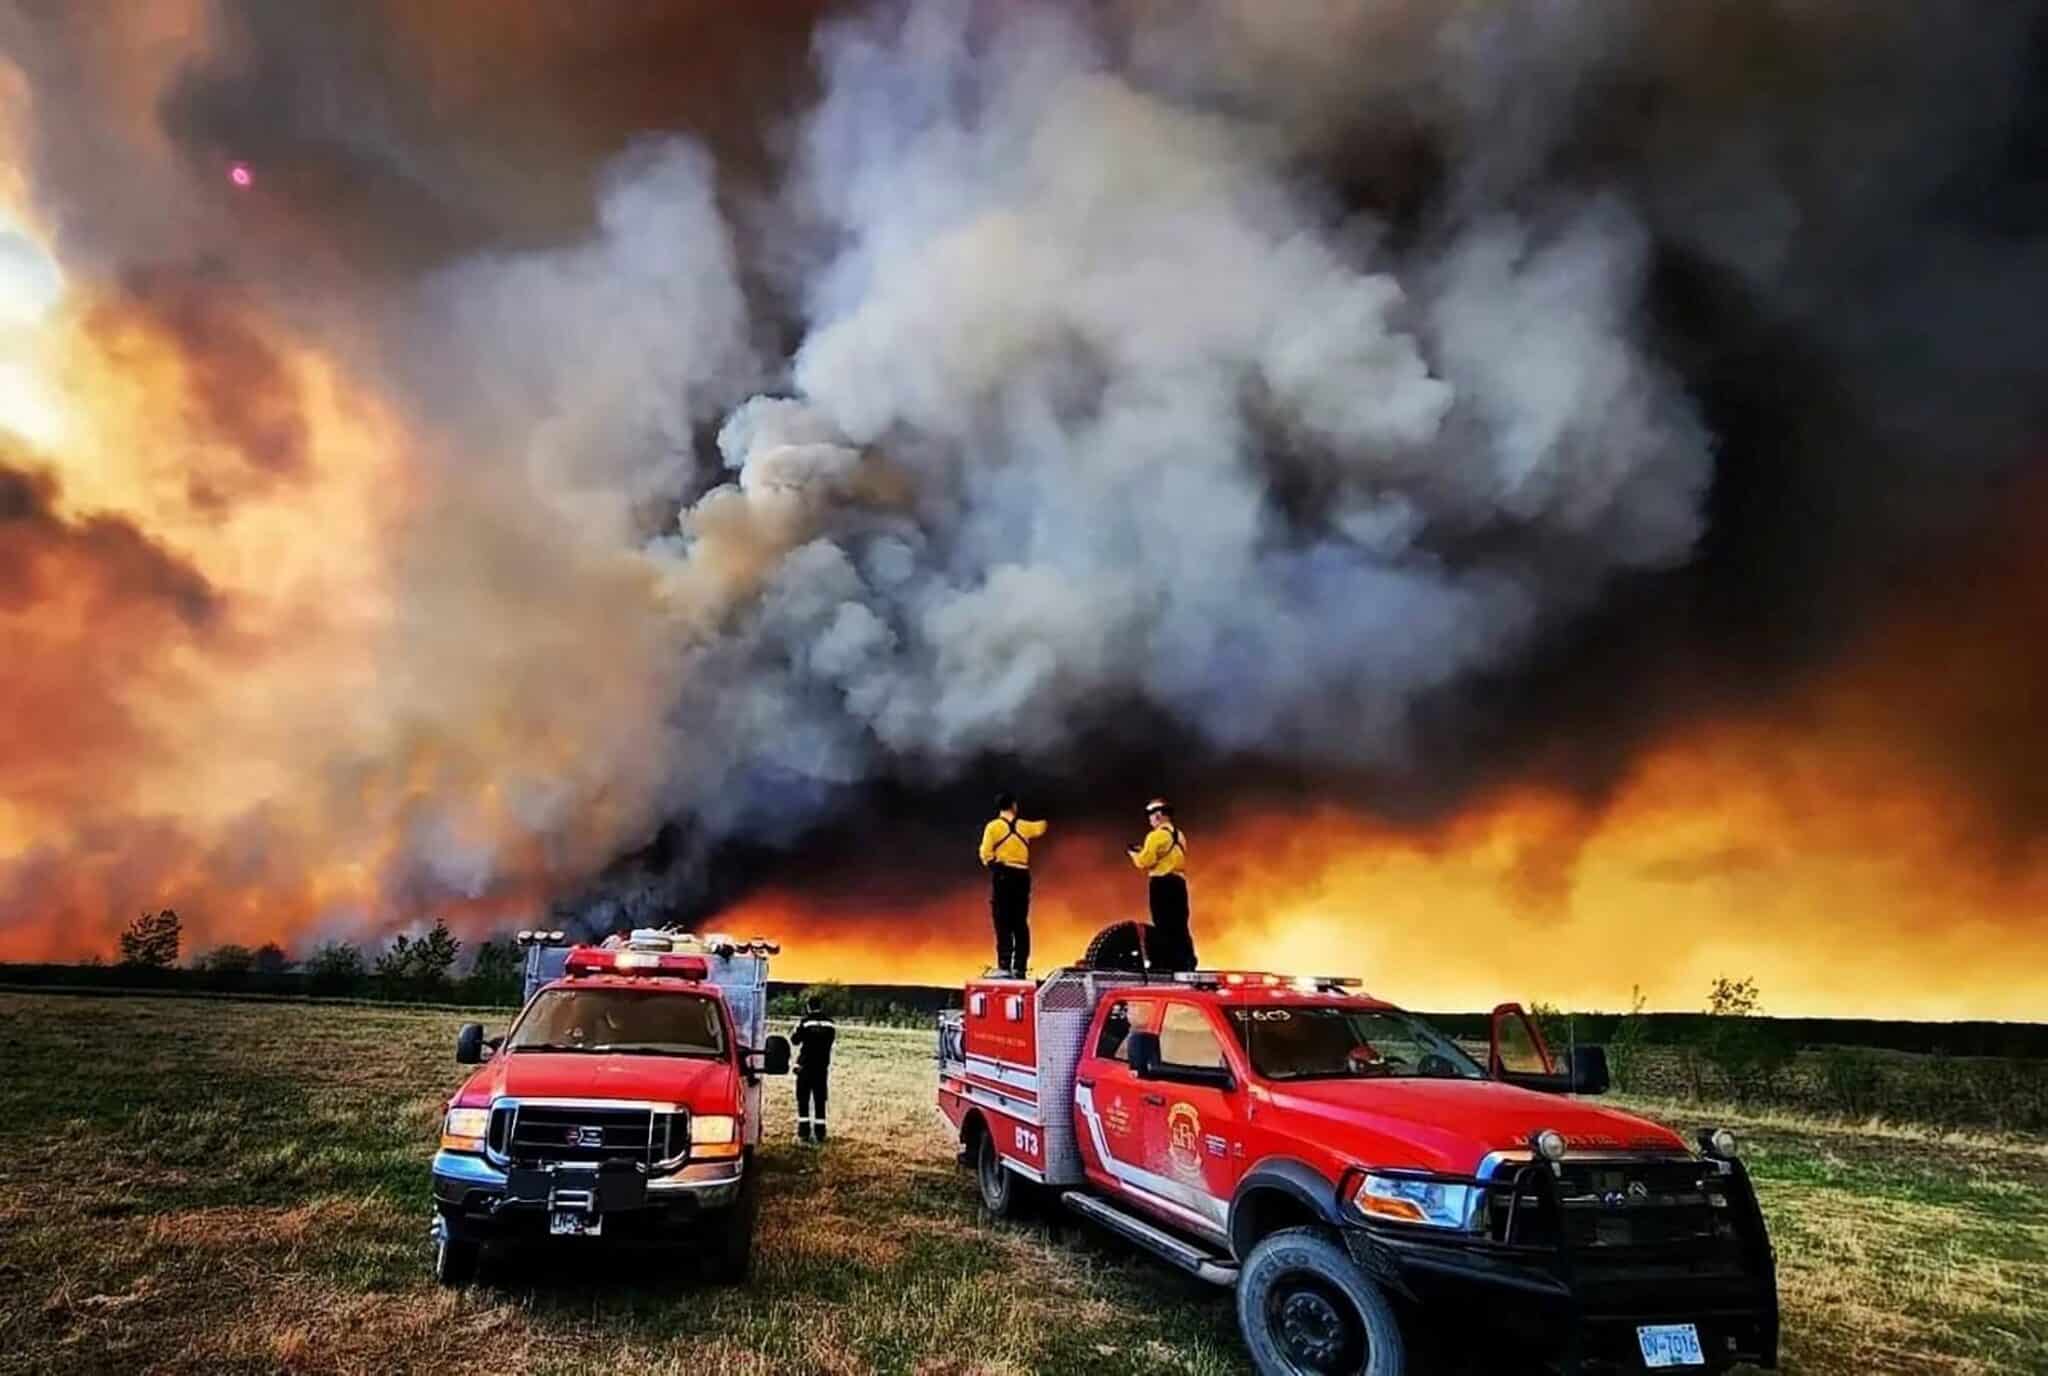 Firefighters stand on a Kamloops Fire Rescue truck at a wildfire near Fort St. John, British Columbia, May 14, 2023. Wildfires have always occurred, but experts say the warming climate is increasing their severity. (OSV News photo/Kamloops Fire Rescue handout via Reuters)